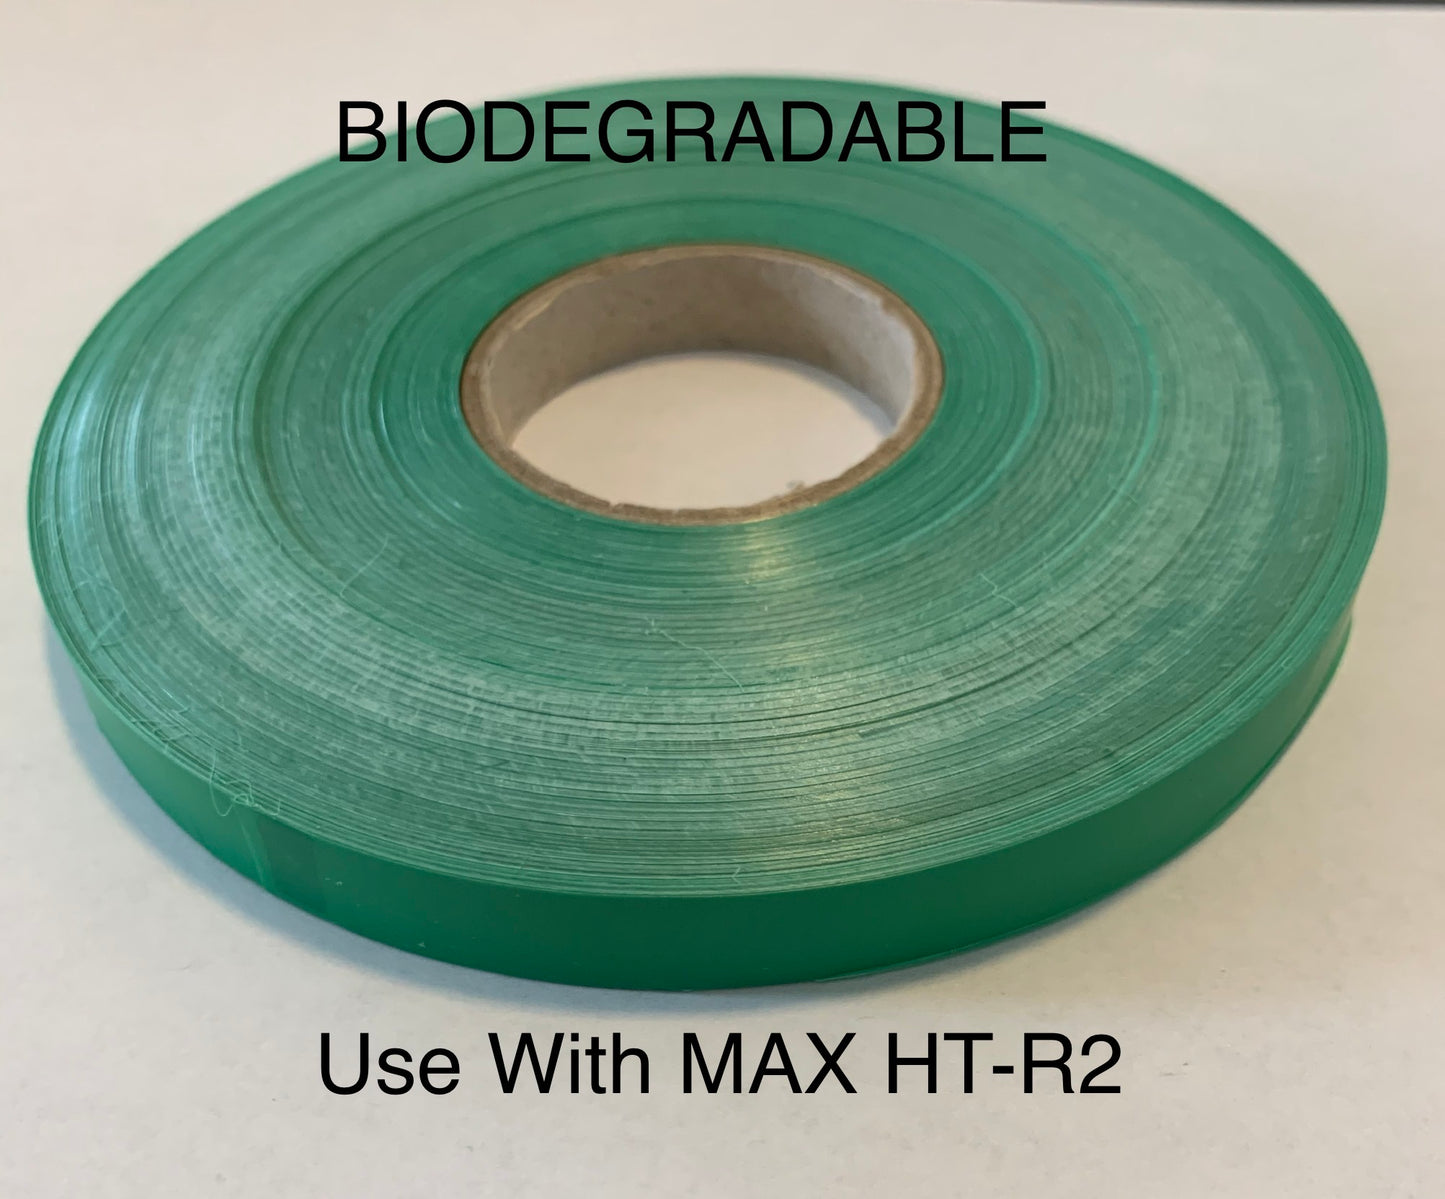 BIODEGRADABLE Tie tape Large Roll 1/2”x 328' 4ml for Tapener HT-R2